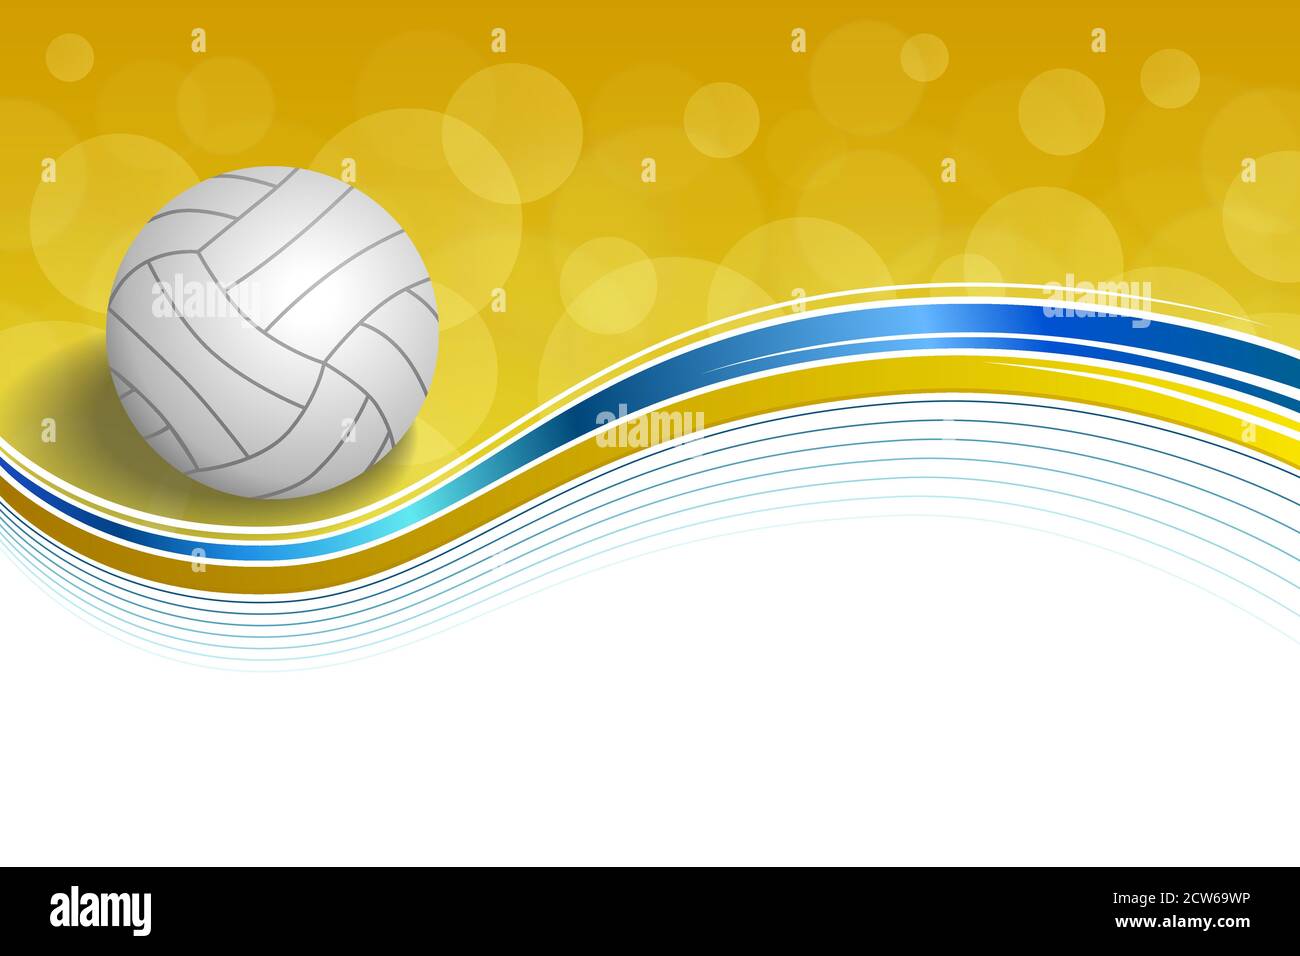 Top 85+ imagen volleyball background images - Ecover.mx